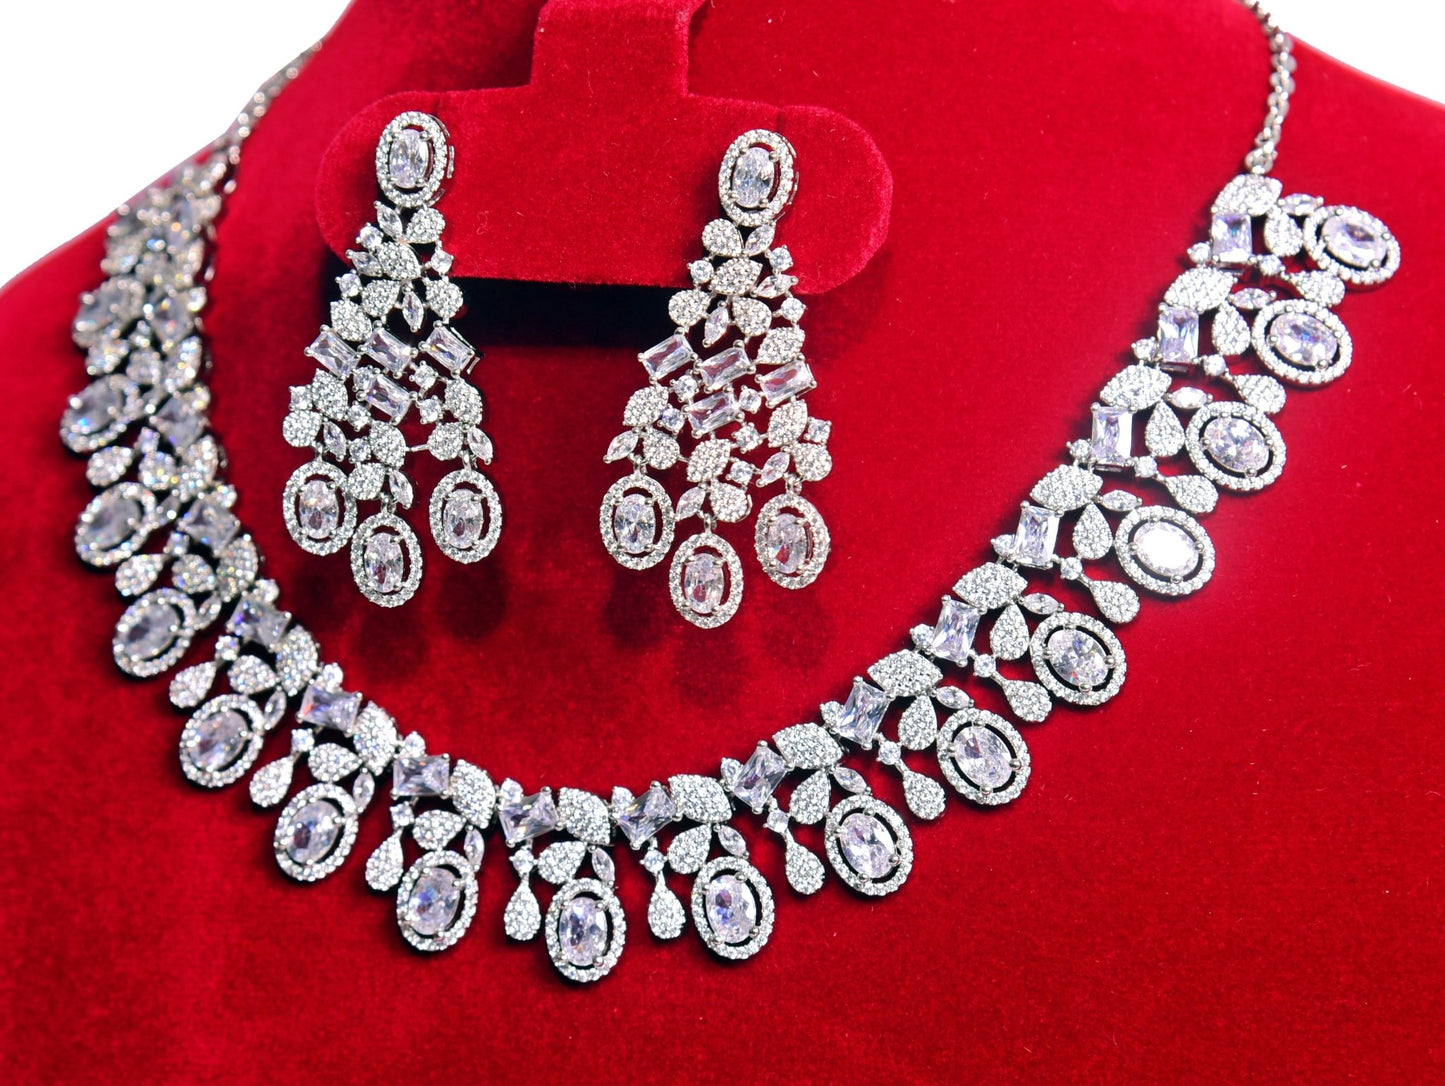 Women's Handmade Designer Necklace | Imported Zirconia Stones and Pure 92.5 Silver | - Indique